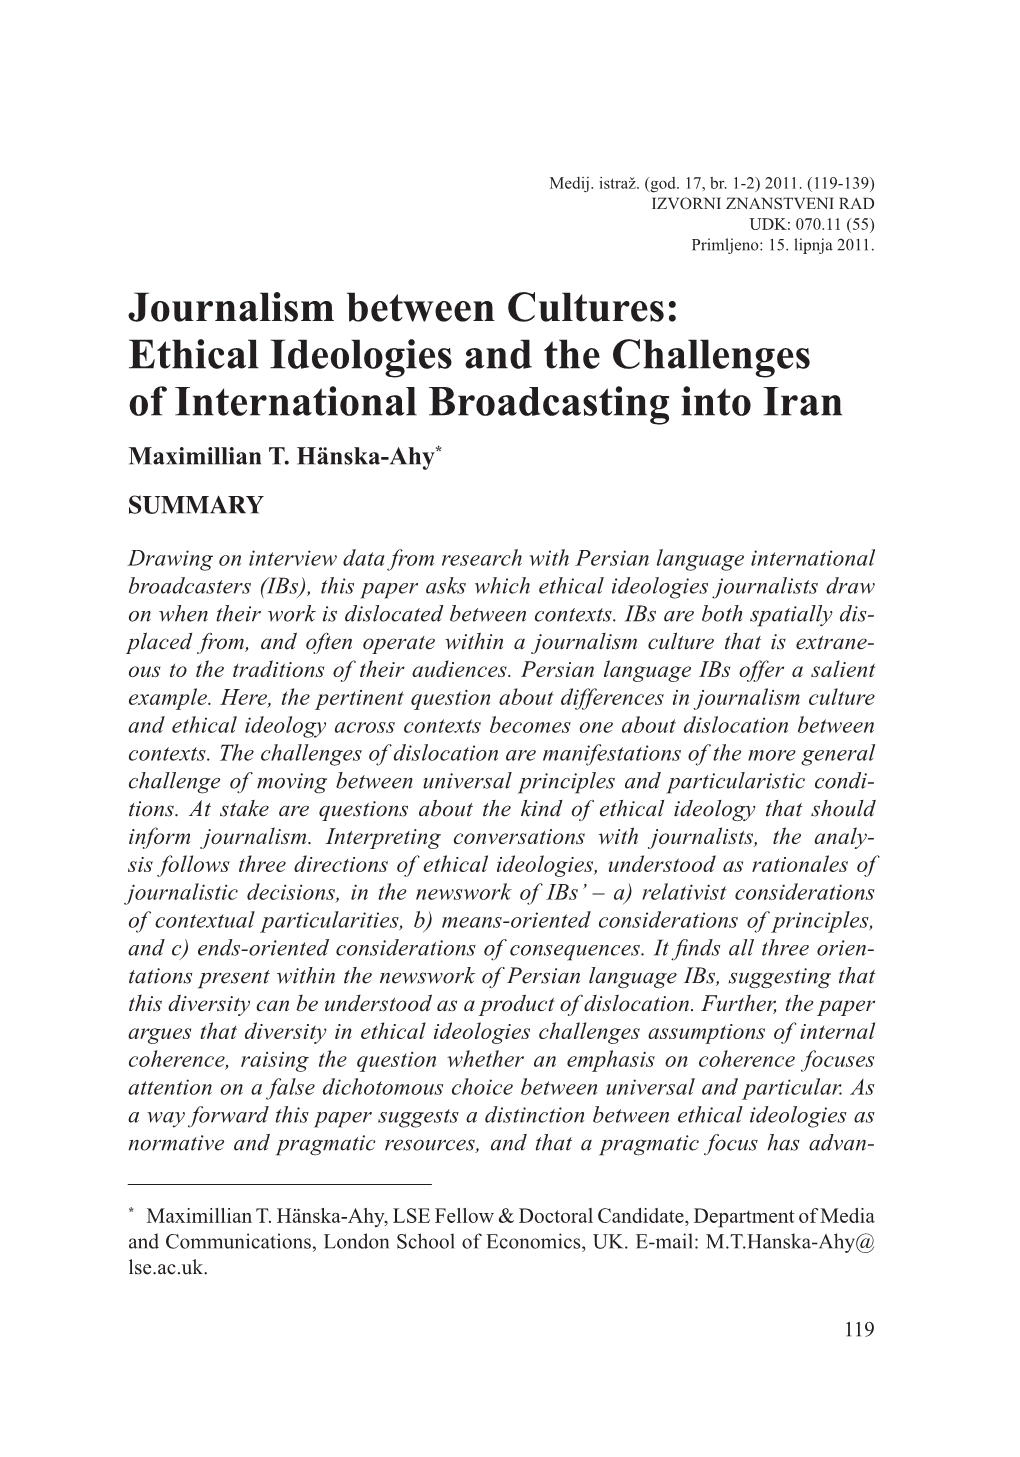 Journalism Between Cultures: Ethical Ideologies and the Challenges of International Broadcasting Into Iran Maximillian T